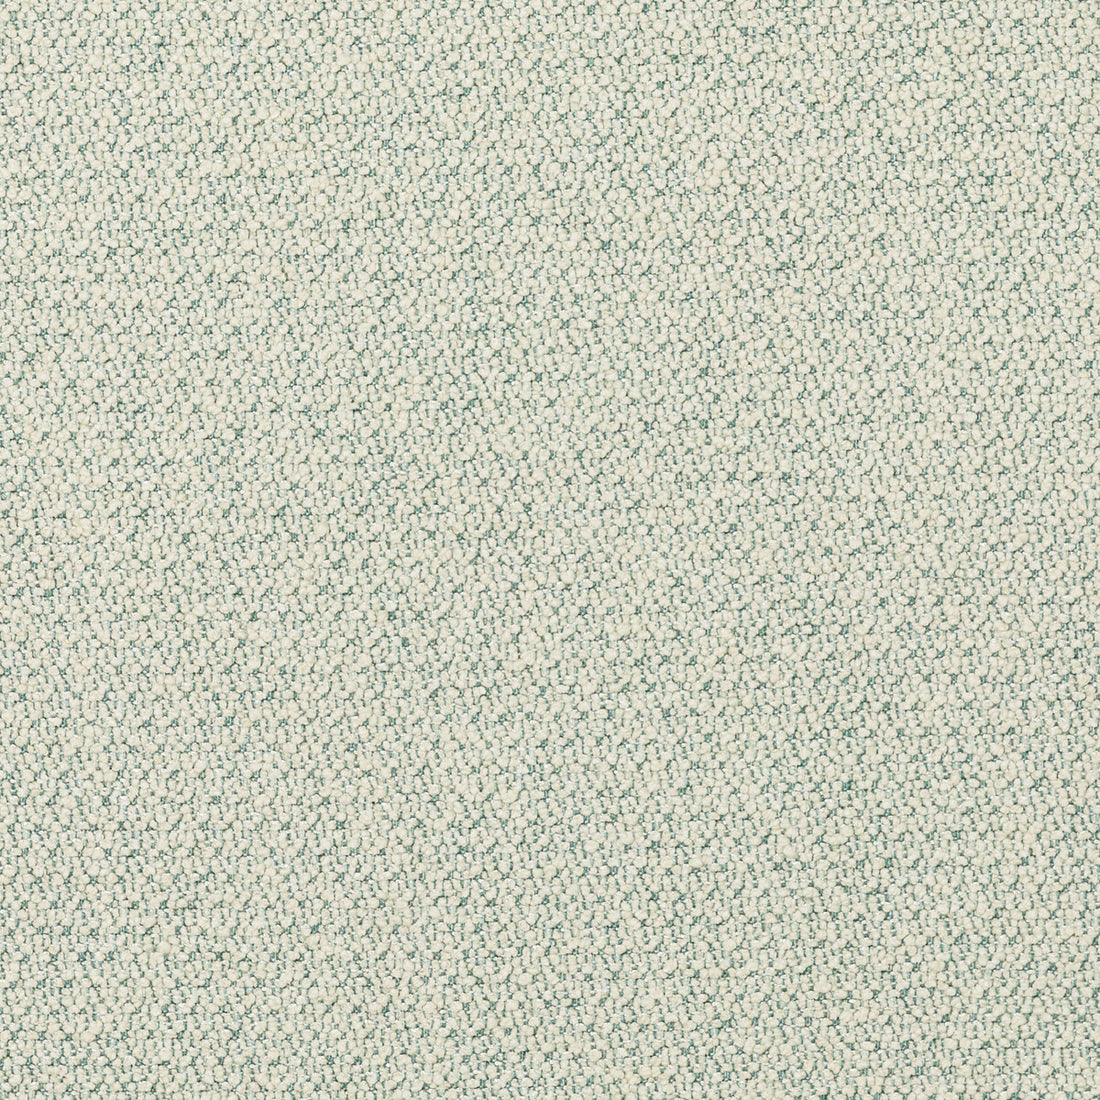 Bali Boucle fabric in soft aqua color - pattern 36051.135.0 - by Kravet Couture in the Luxury Textures II collection